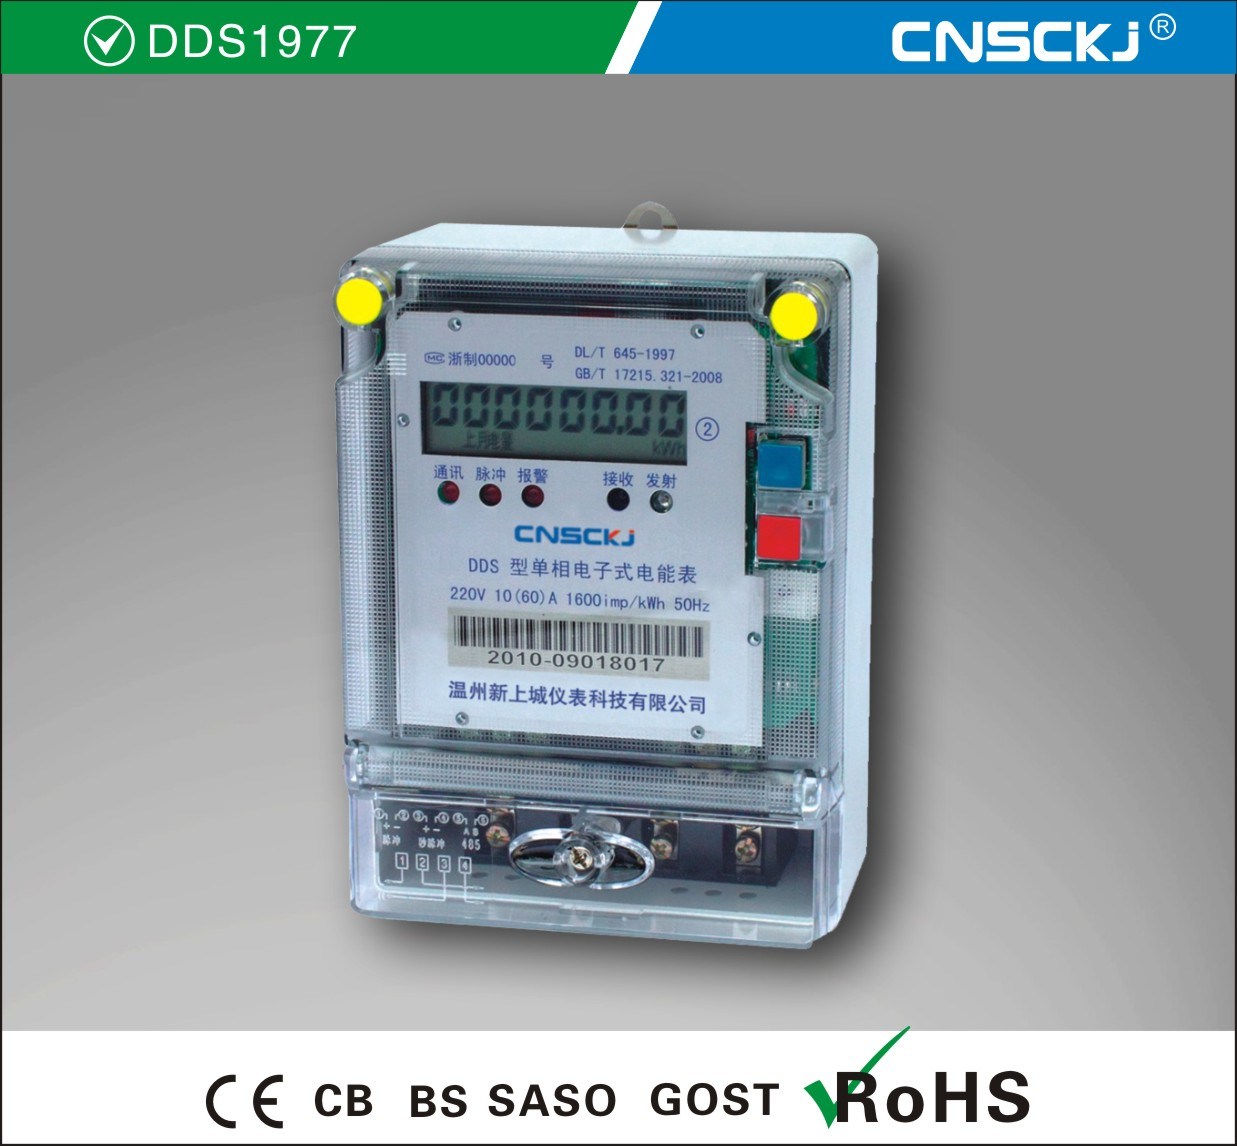 Dds1977 Type Single-Phase Electronic Abstraction-of-Electricity Prevention Watt-Hour Meter